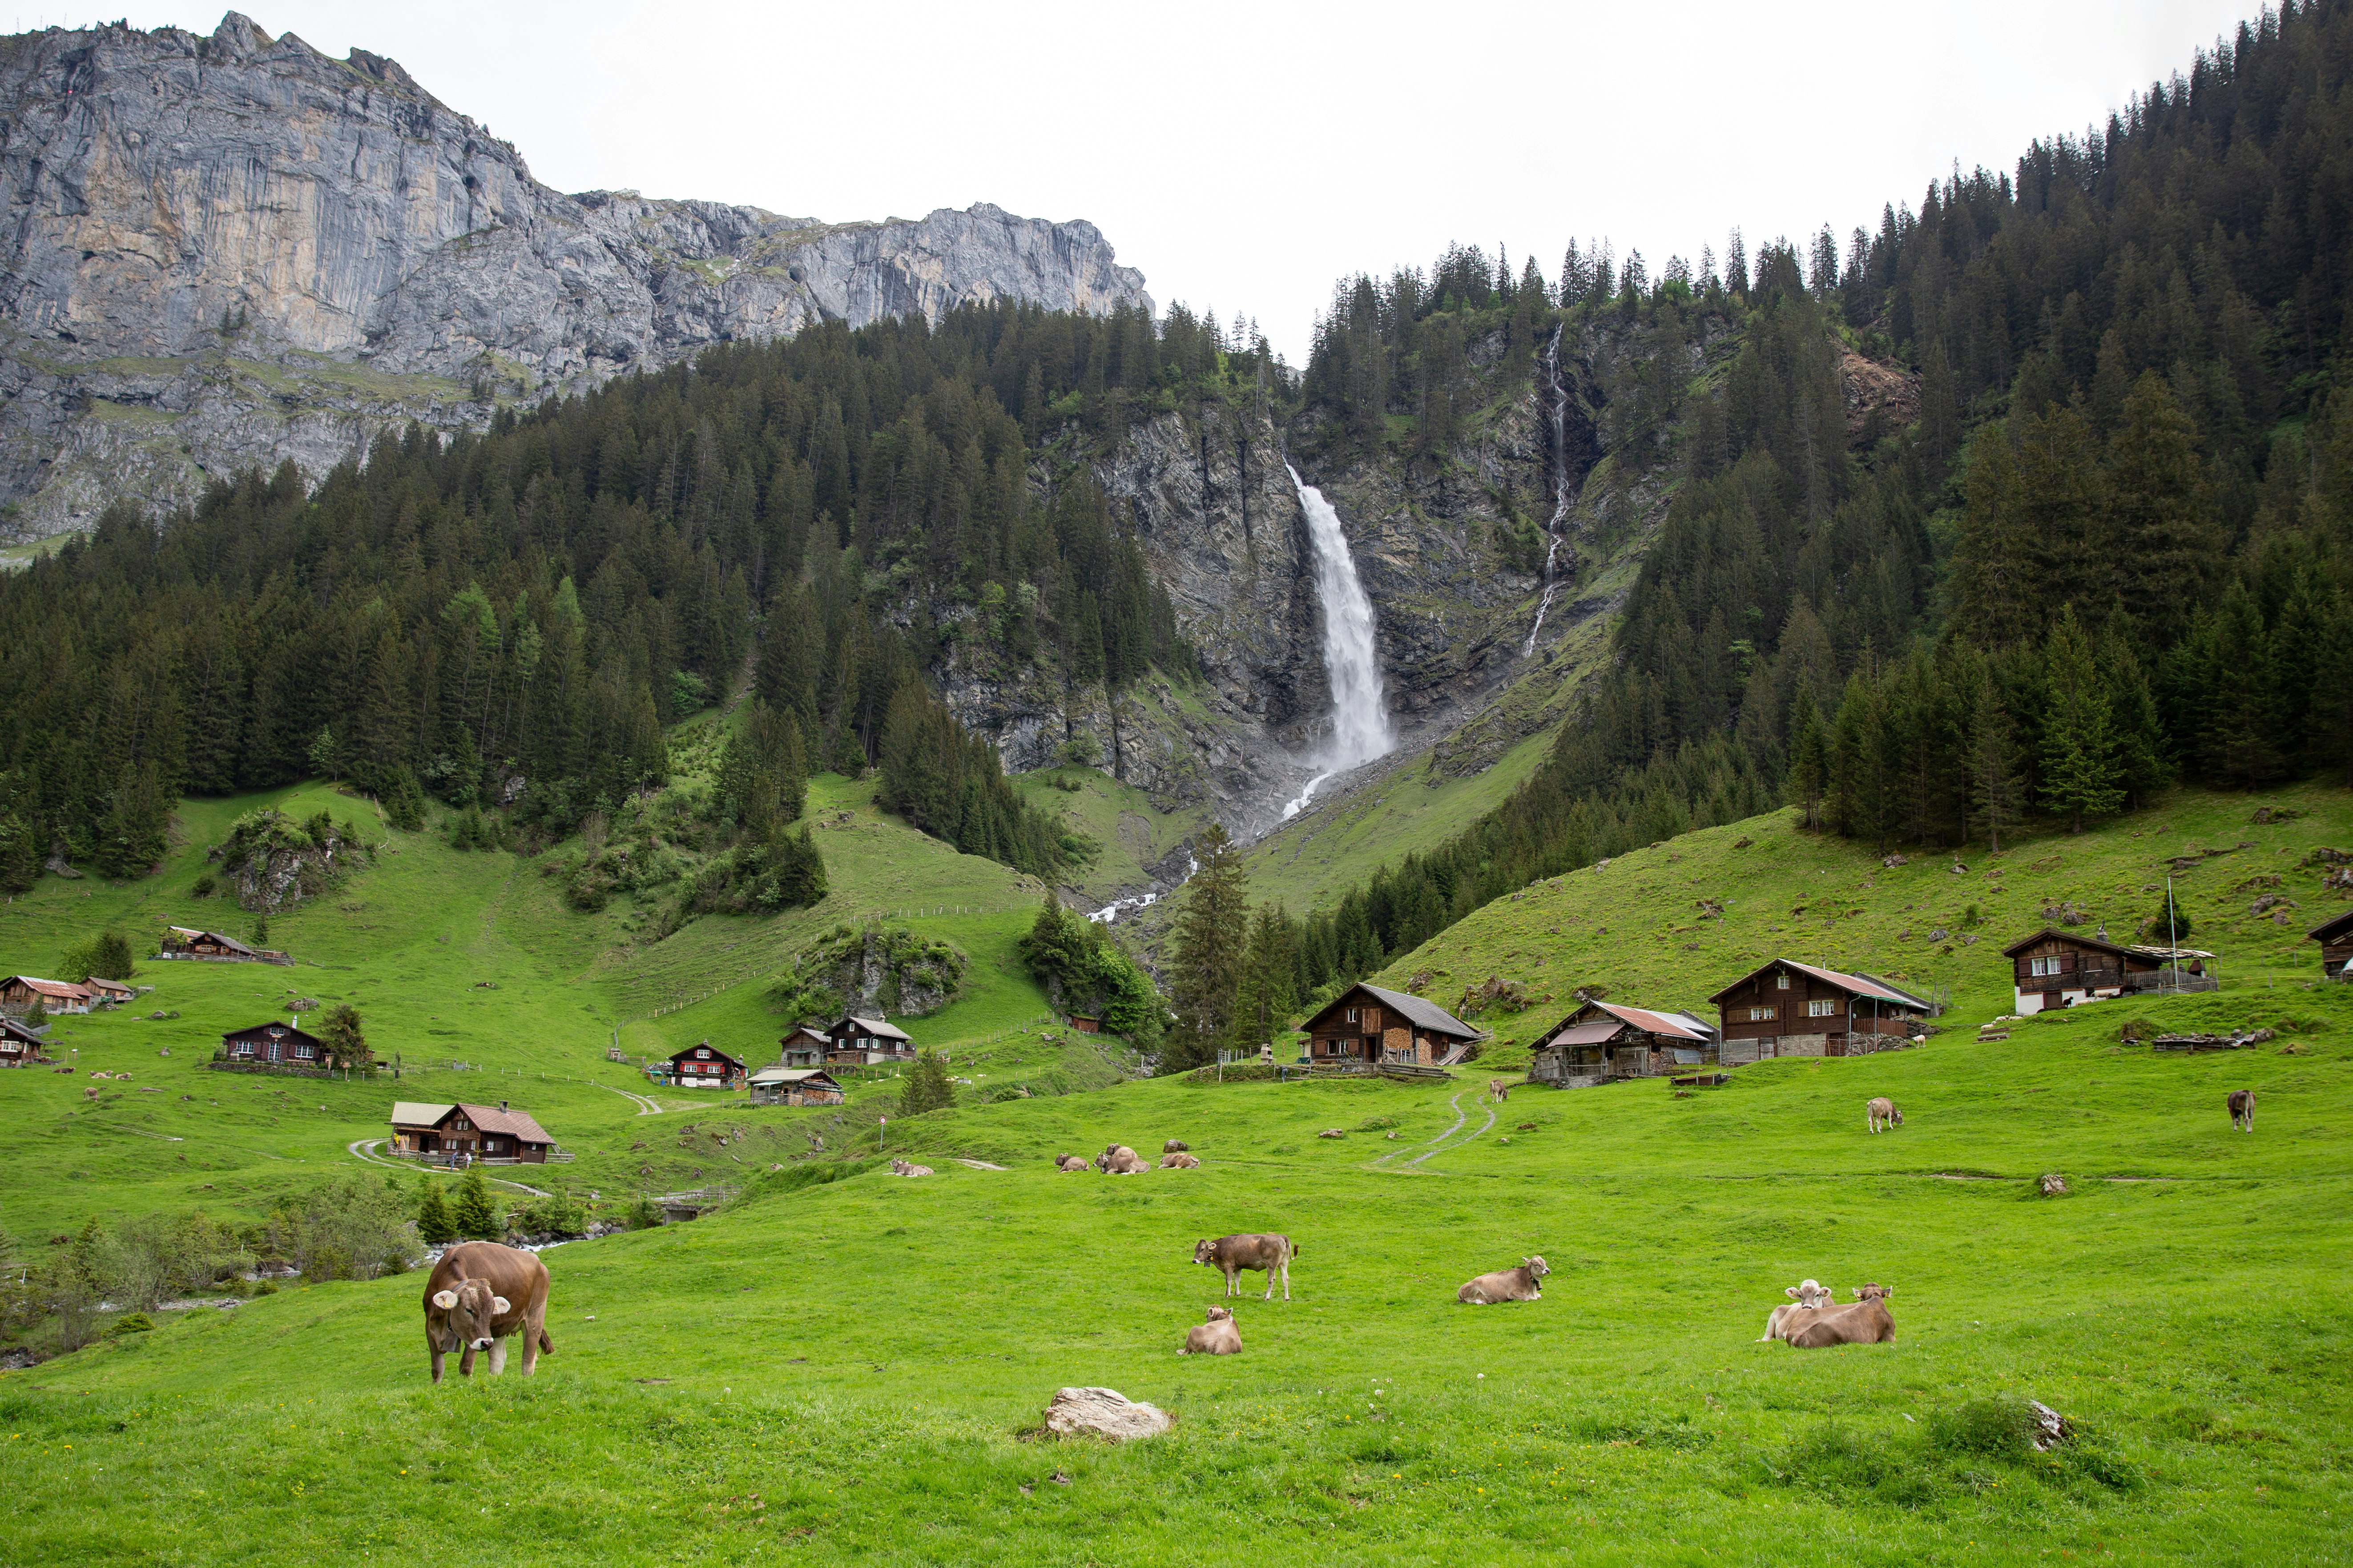 herd of sheep on green grass field near green trees and mountain during daytime